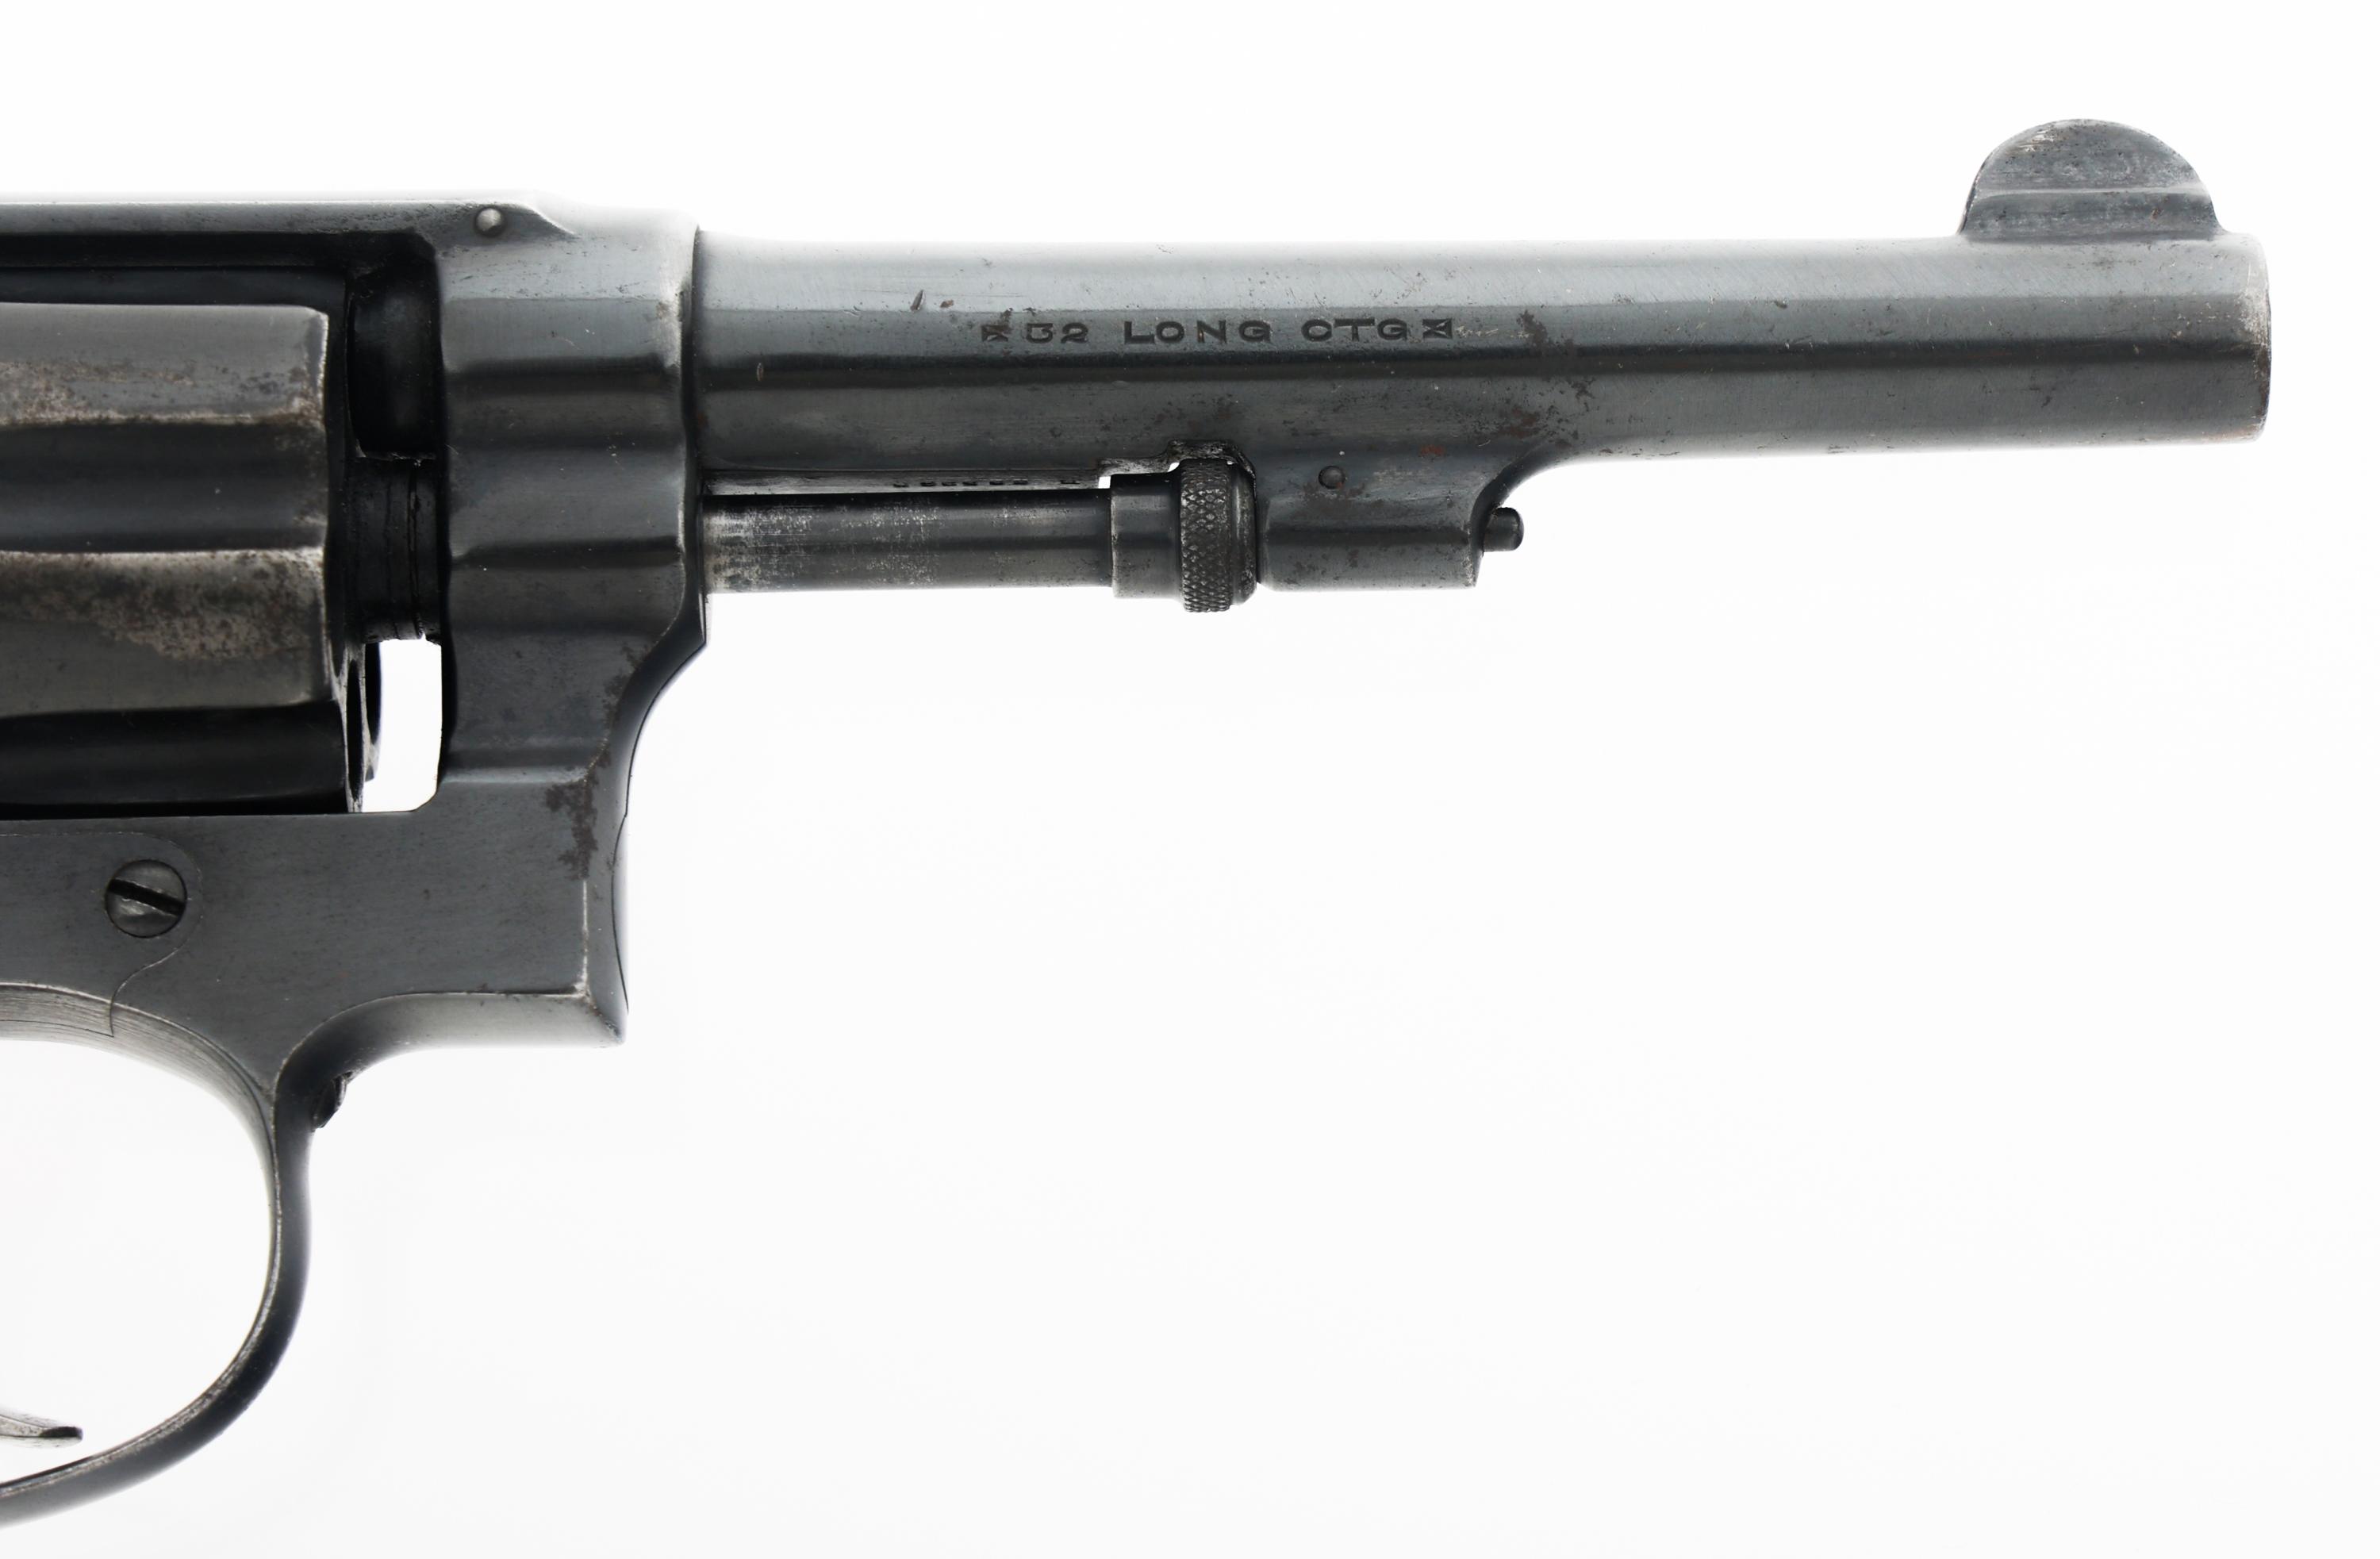 SMITH & WESSON REGULATION POLICE .32 LONG REVOLVER